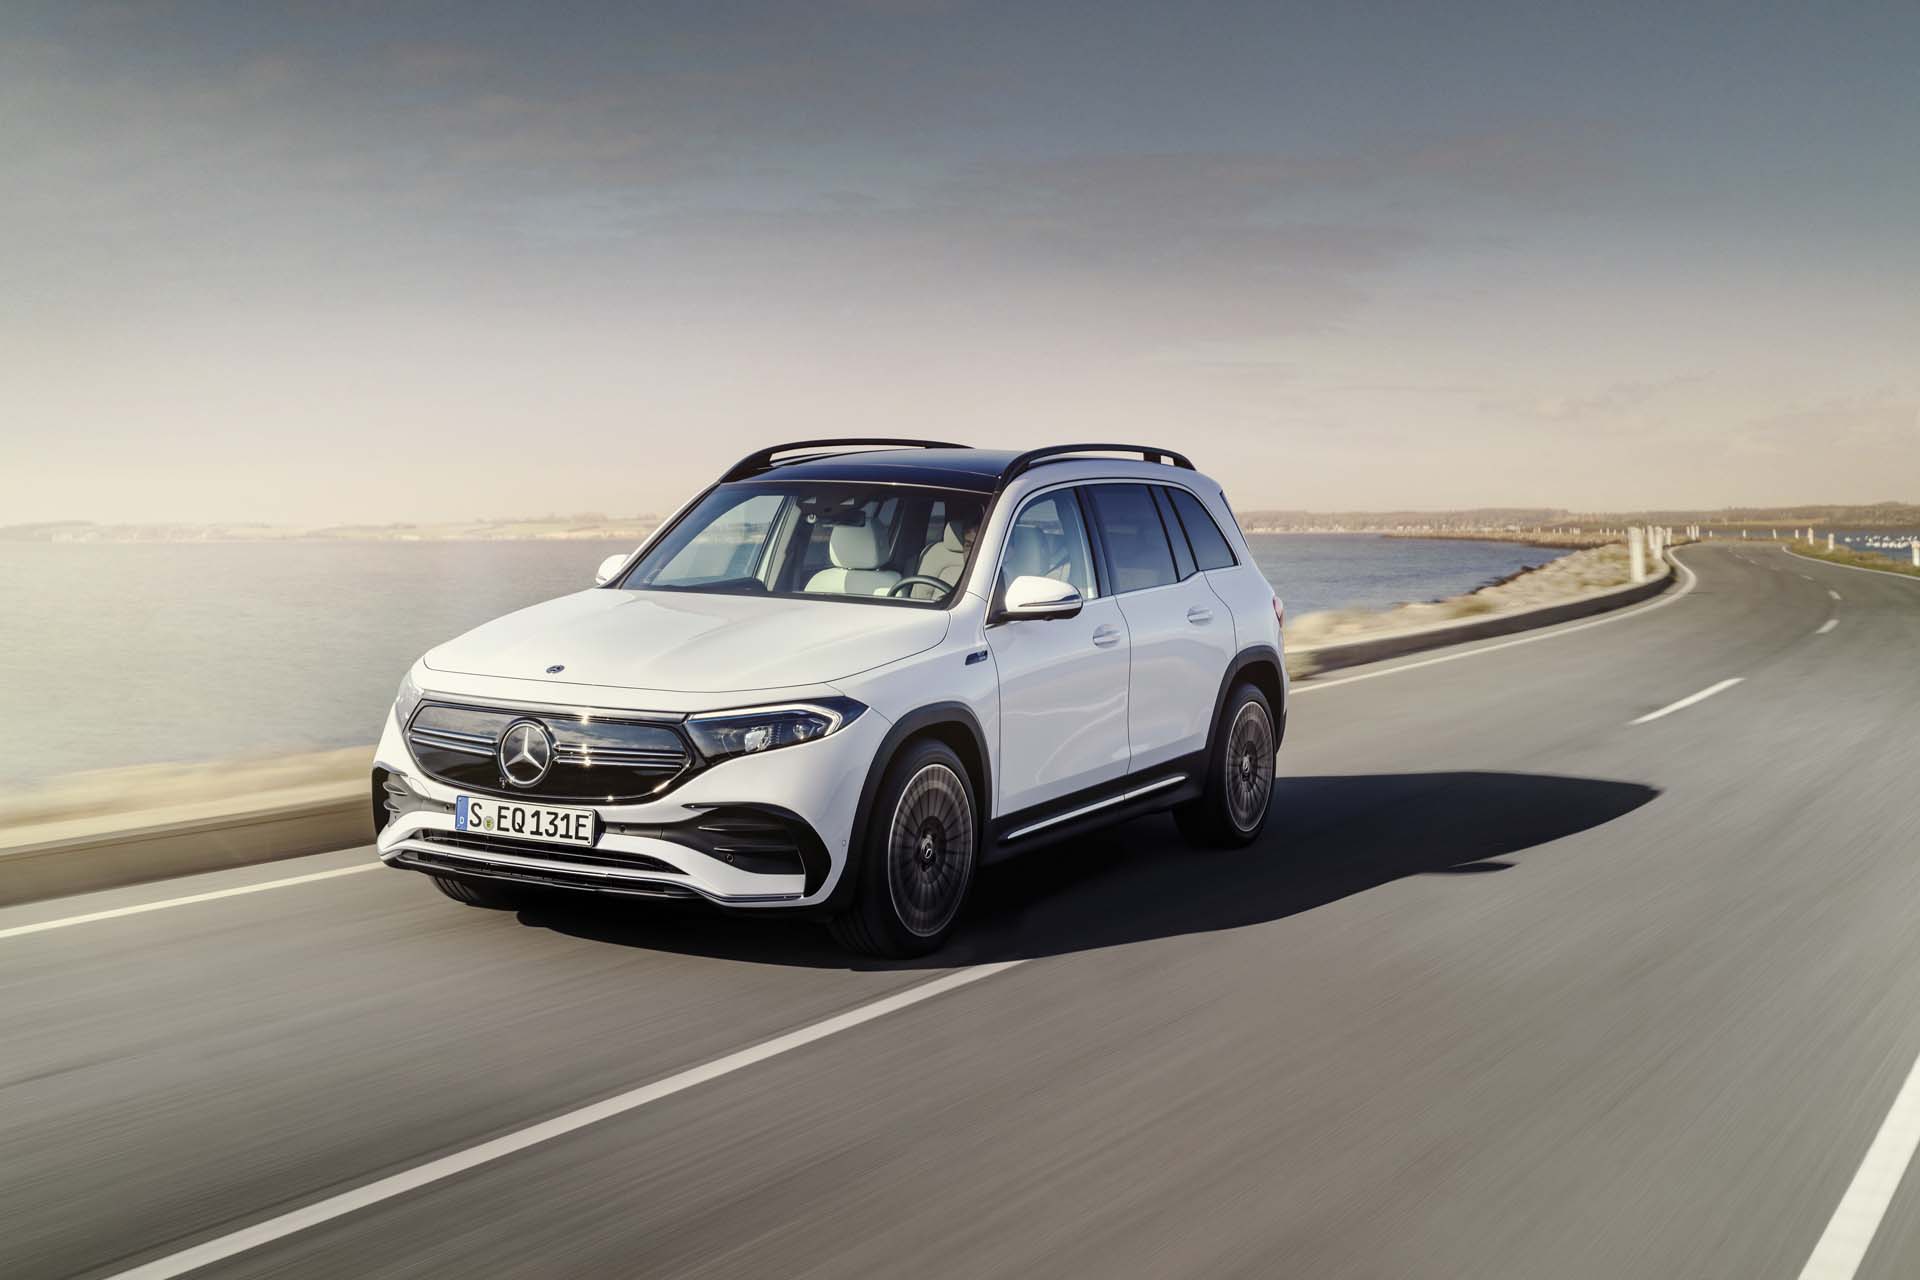 Mercedes EQB electric SUV: Specs and features confirmed for 2022 US arrivalMercedes EQB electric SUV: Specs and features confirmed for 2022 US arrival